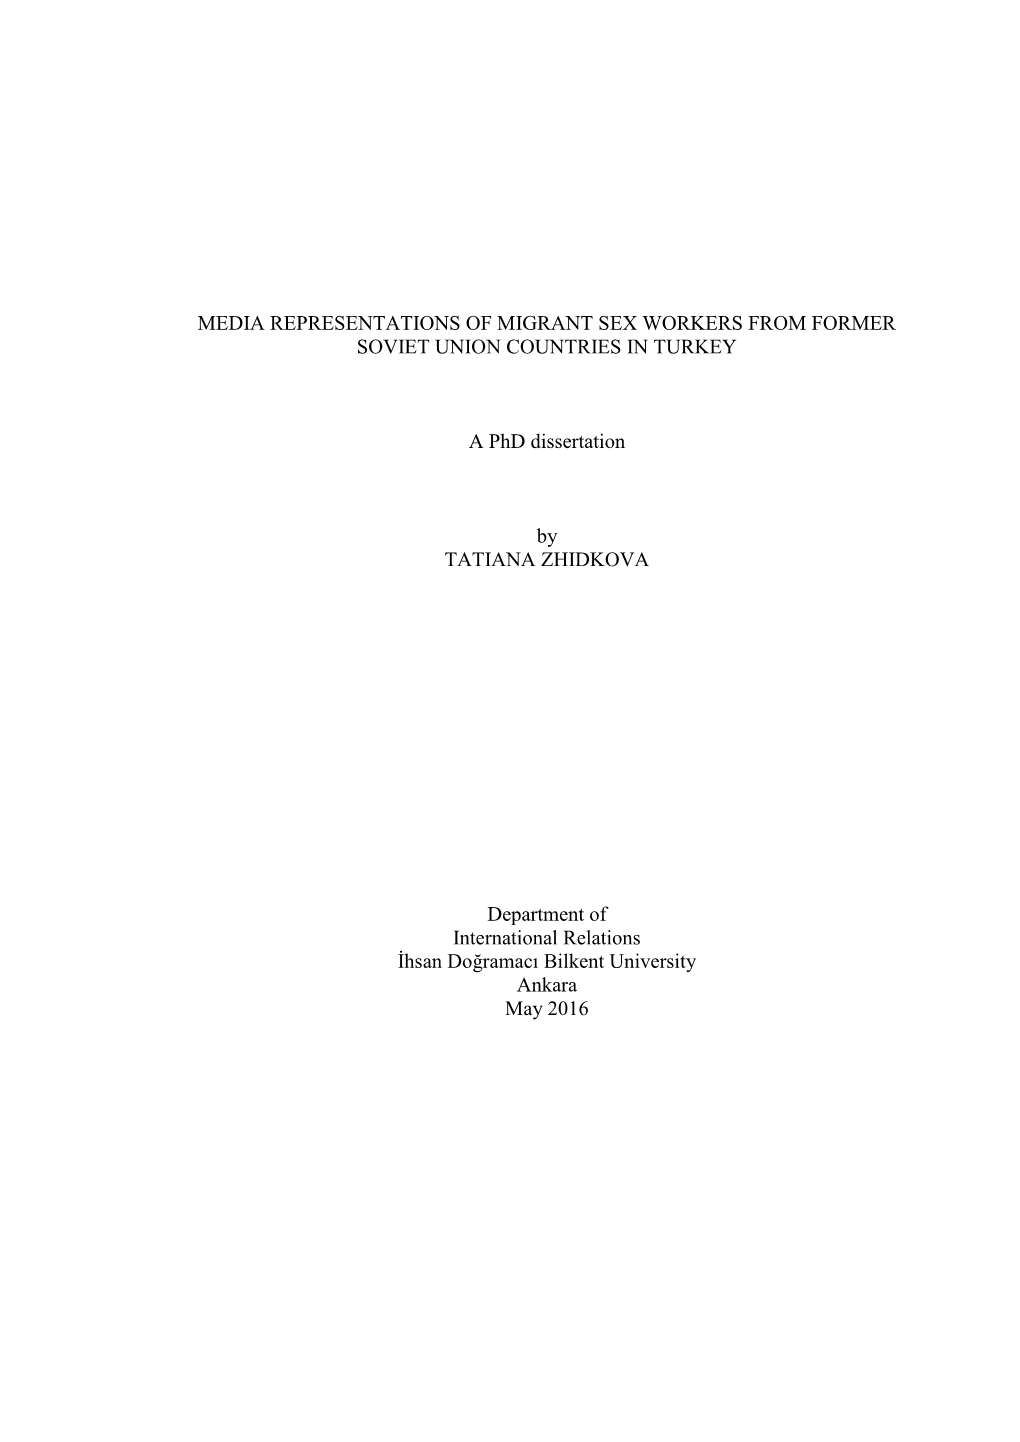 MEDIA REPRESENTATIONS of MIGRANT SEX WORKERS from FORMER SOVIET UNION COUNTRIES in TURKEY a Phd Dissertation by TATIANA ZHIDKOVA